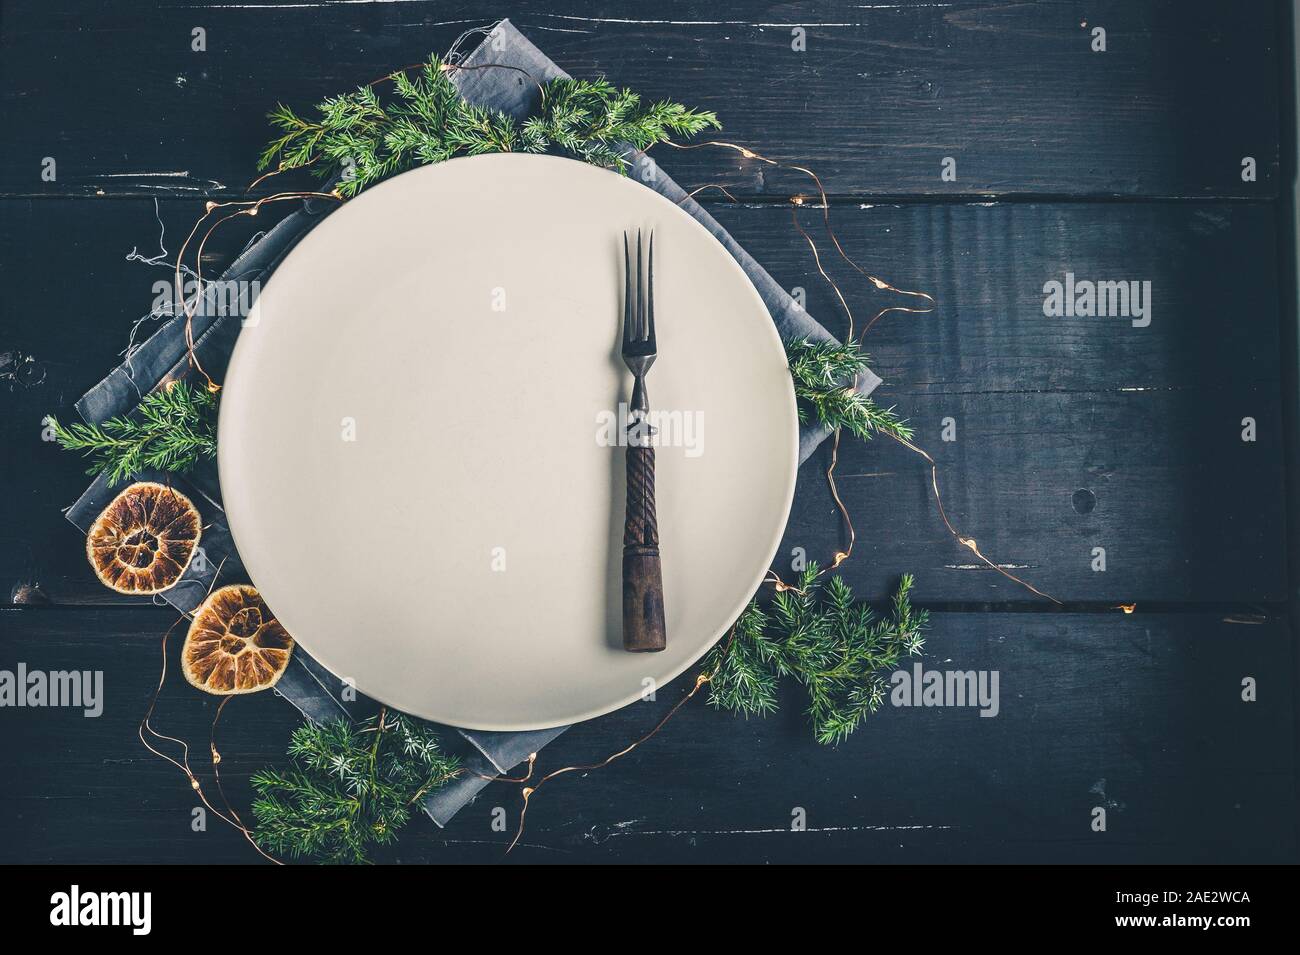 Festive Christmas table setting with a rustic vintage crockery on a dark background. Copy space Stock Photo